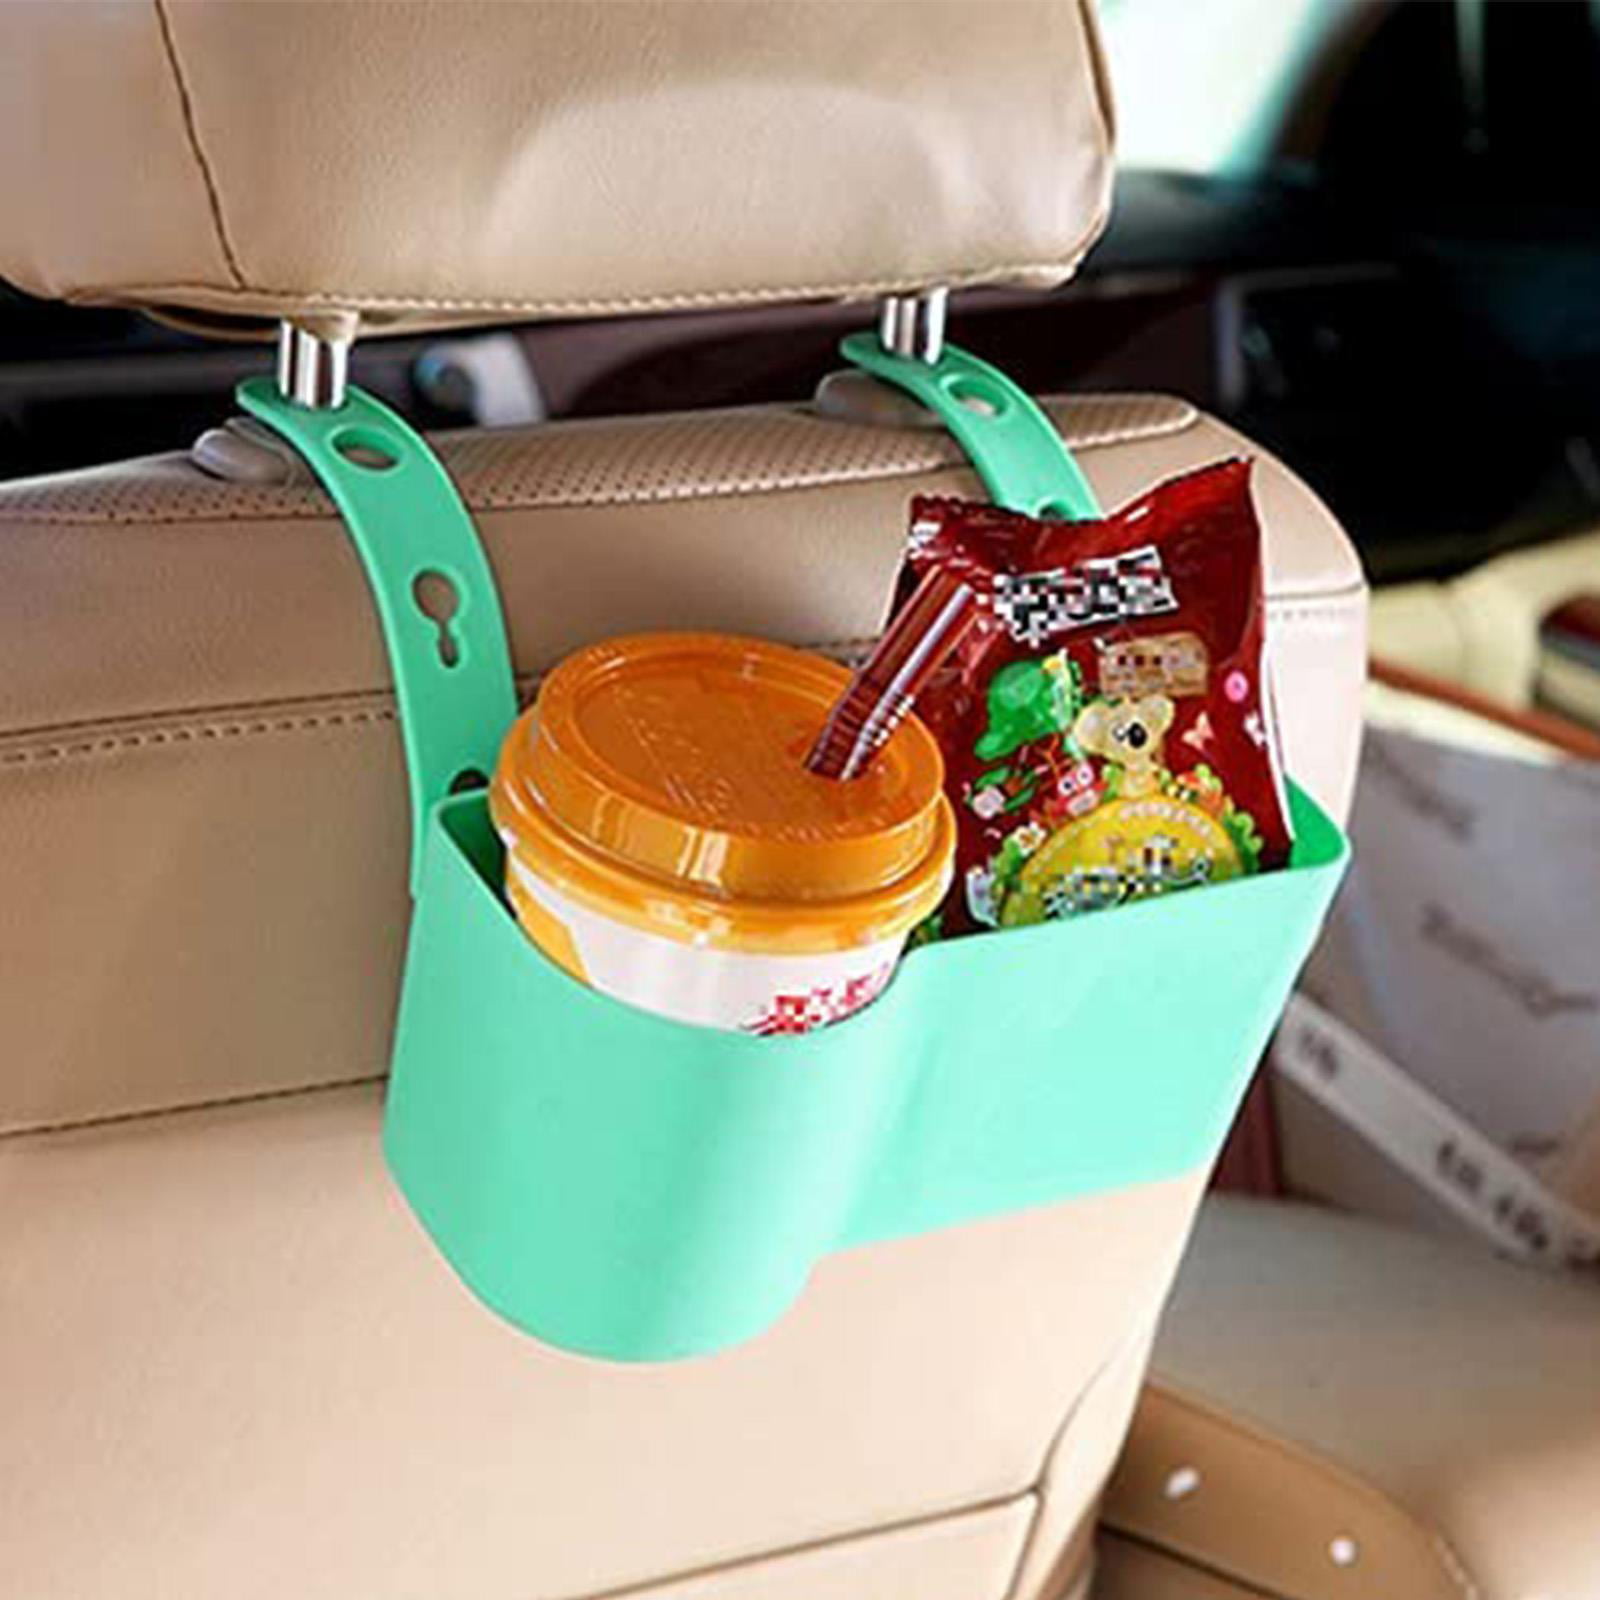 Car Headrest Cup Holder Multifunction Front Seat Head Pillow Back Shelf  Portable Food Tray And Drink Storage Holders Auto Supply - AliExpress